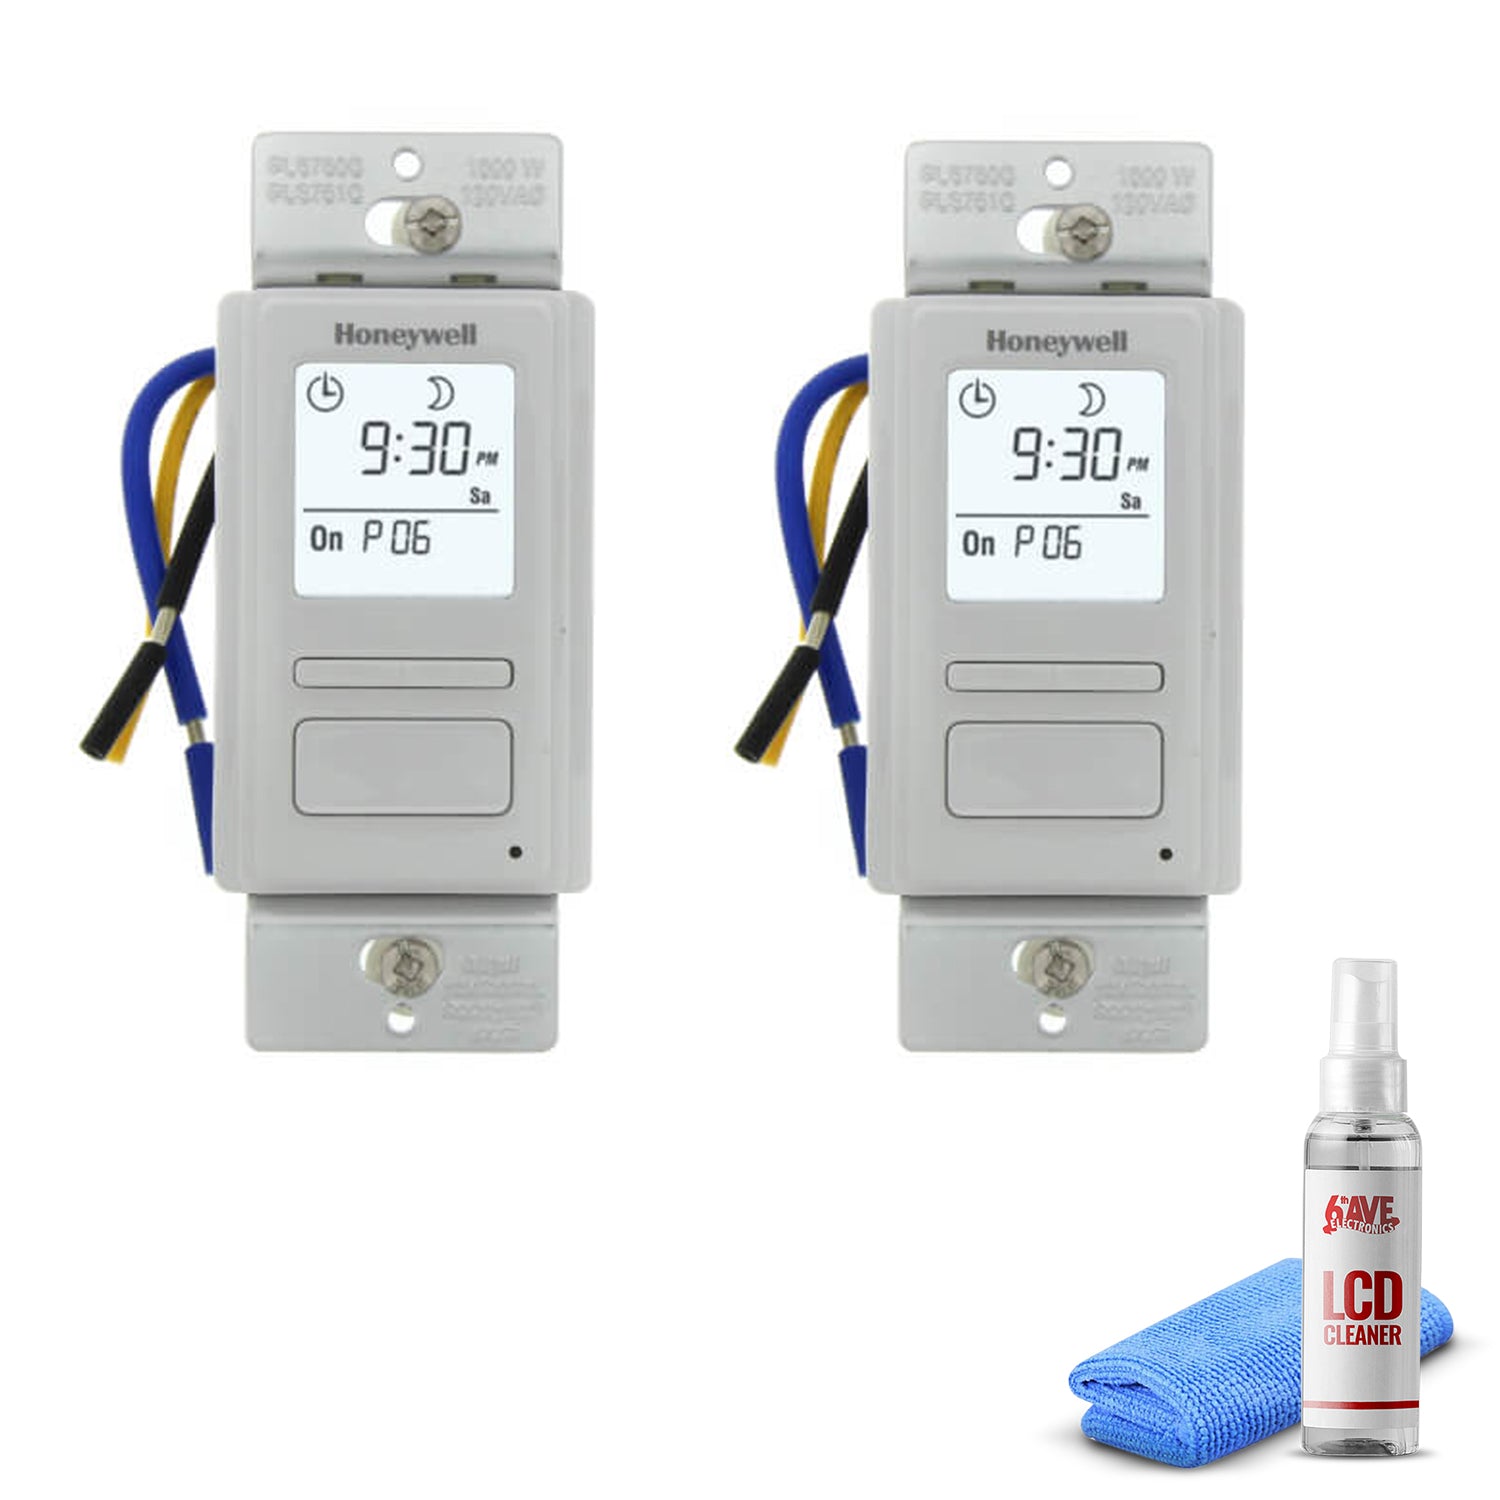 2-Pack Honeywell Timer Switch with Sunrise Sunset Single or 3 Way + LCD Cleaner